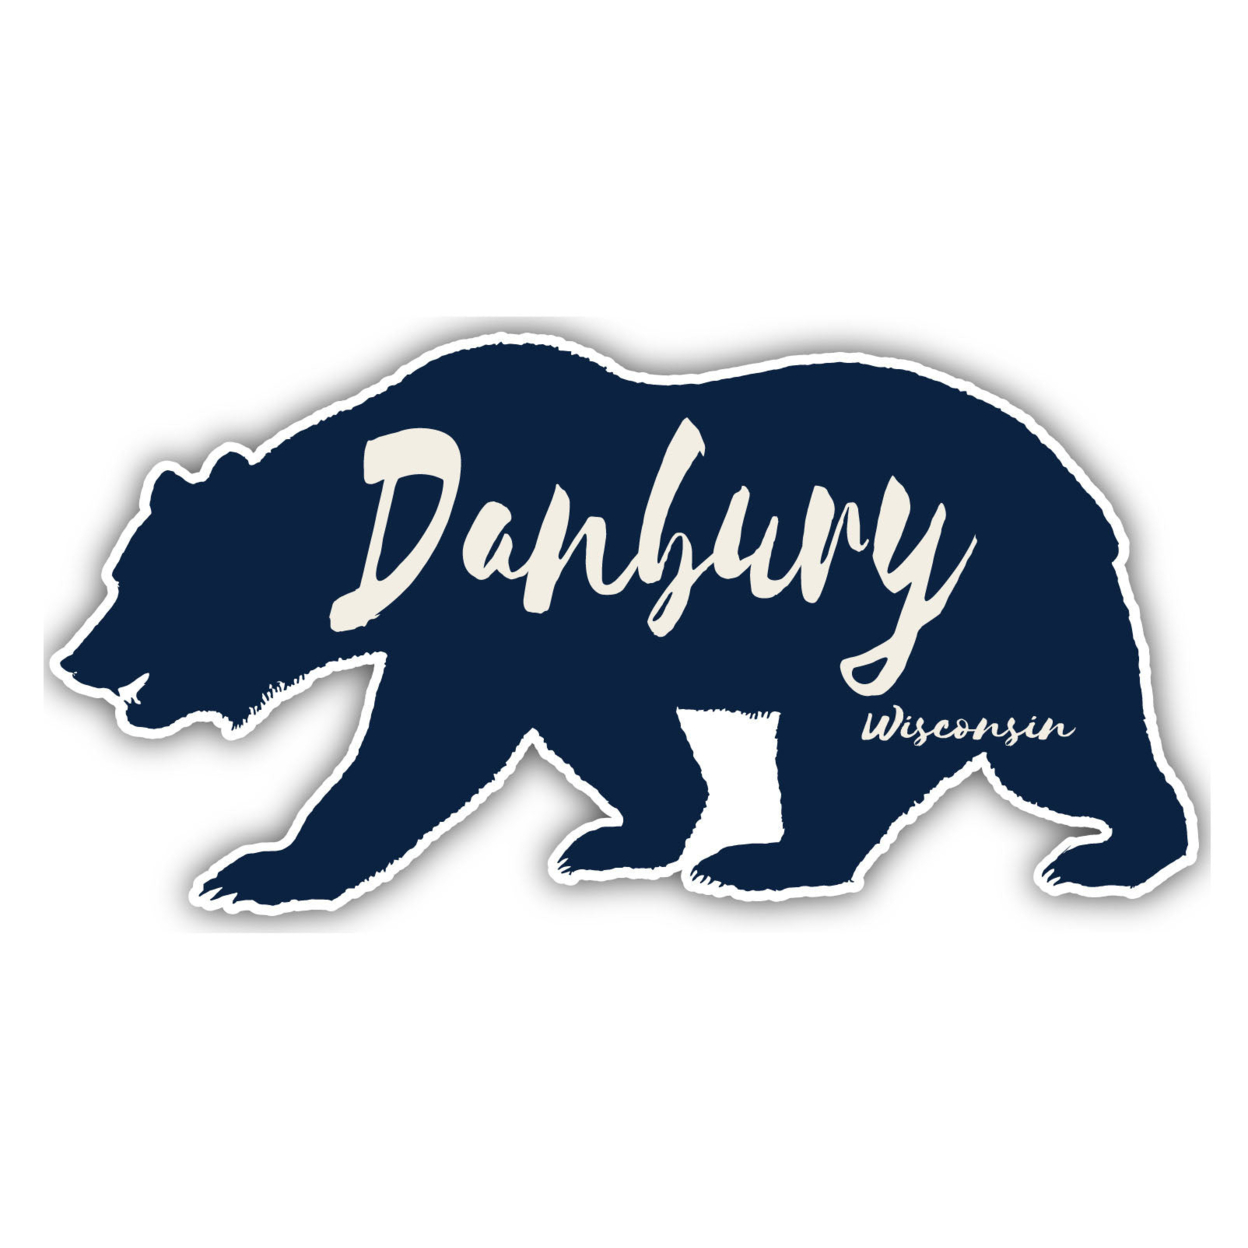 Danbury Wisconsin Souvenir Decorative Stickers (Choose Theme And Size) - 4-Pack, 10-Inch, Great Outdoors